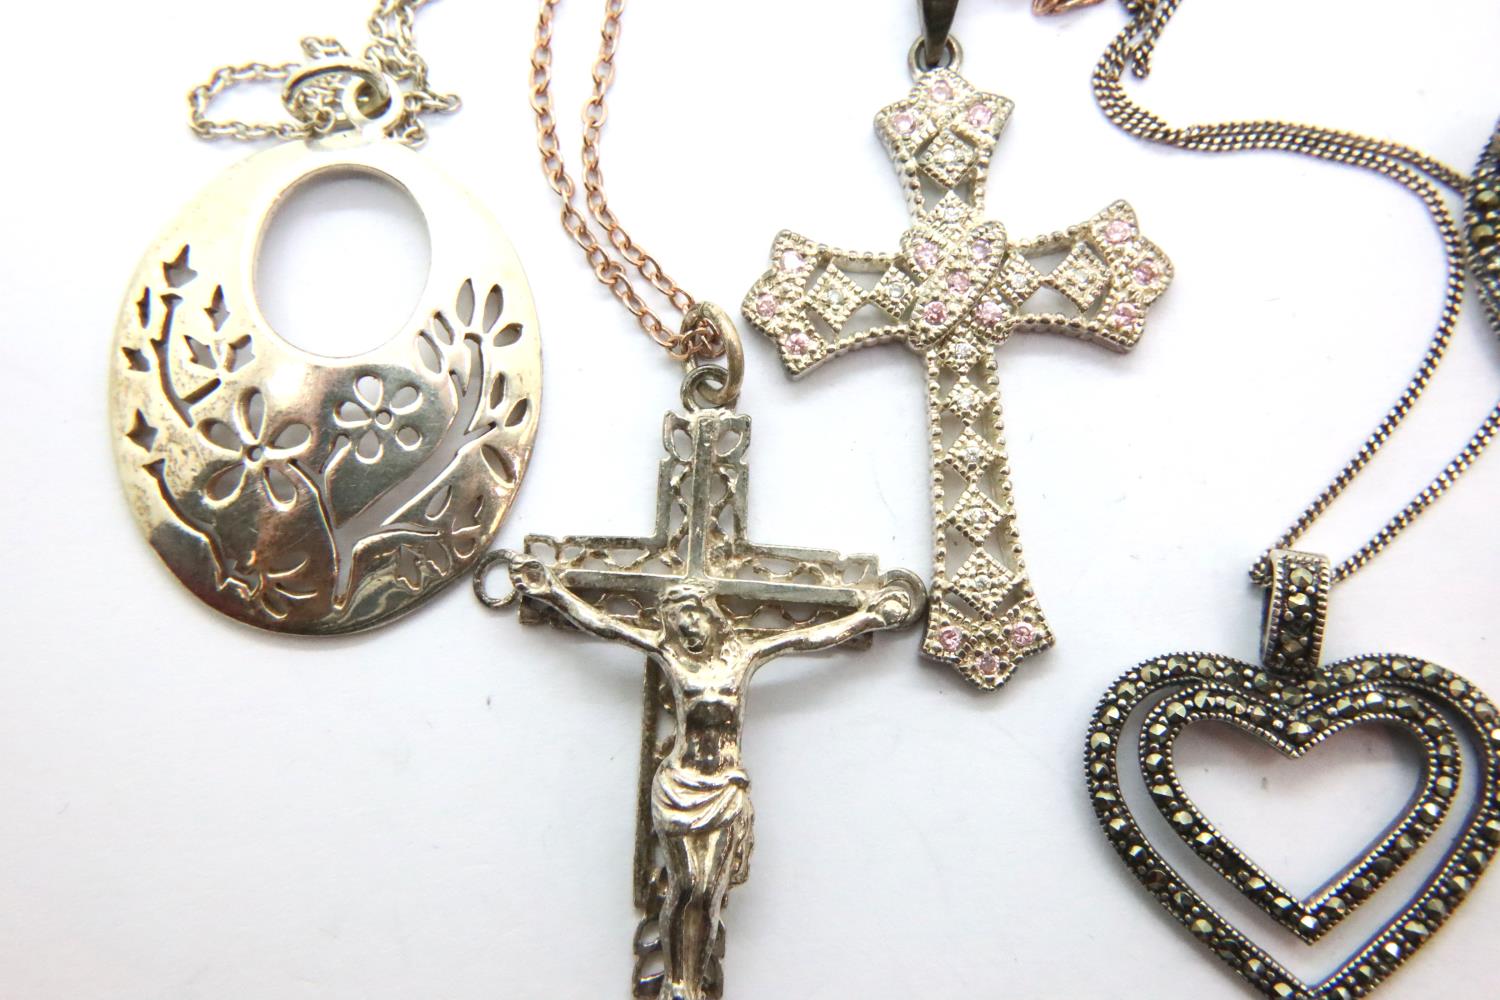 Three 925 silver pendant necklaces, crucifix pendant necklace and two stone-set silver cross - Image 2 of 4